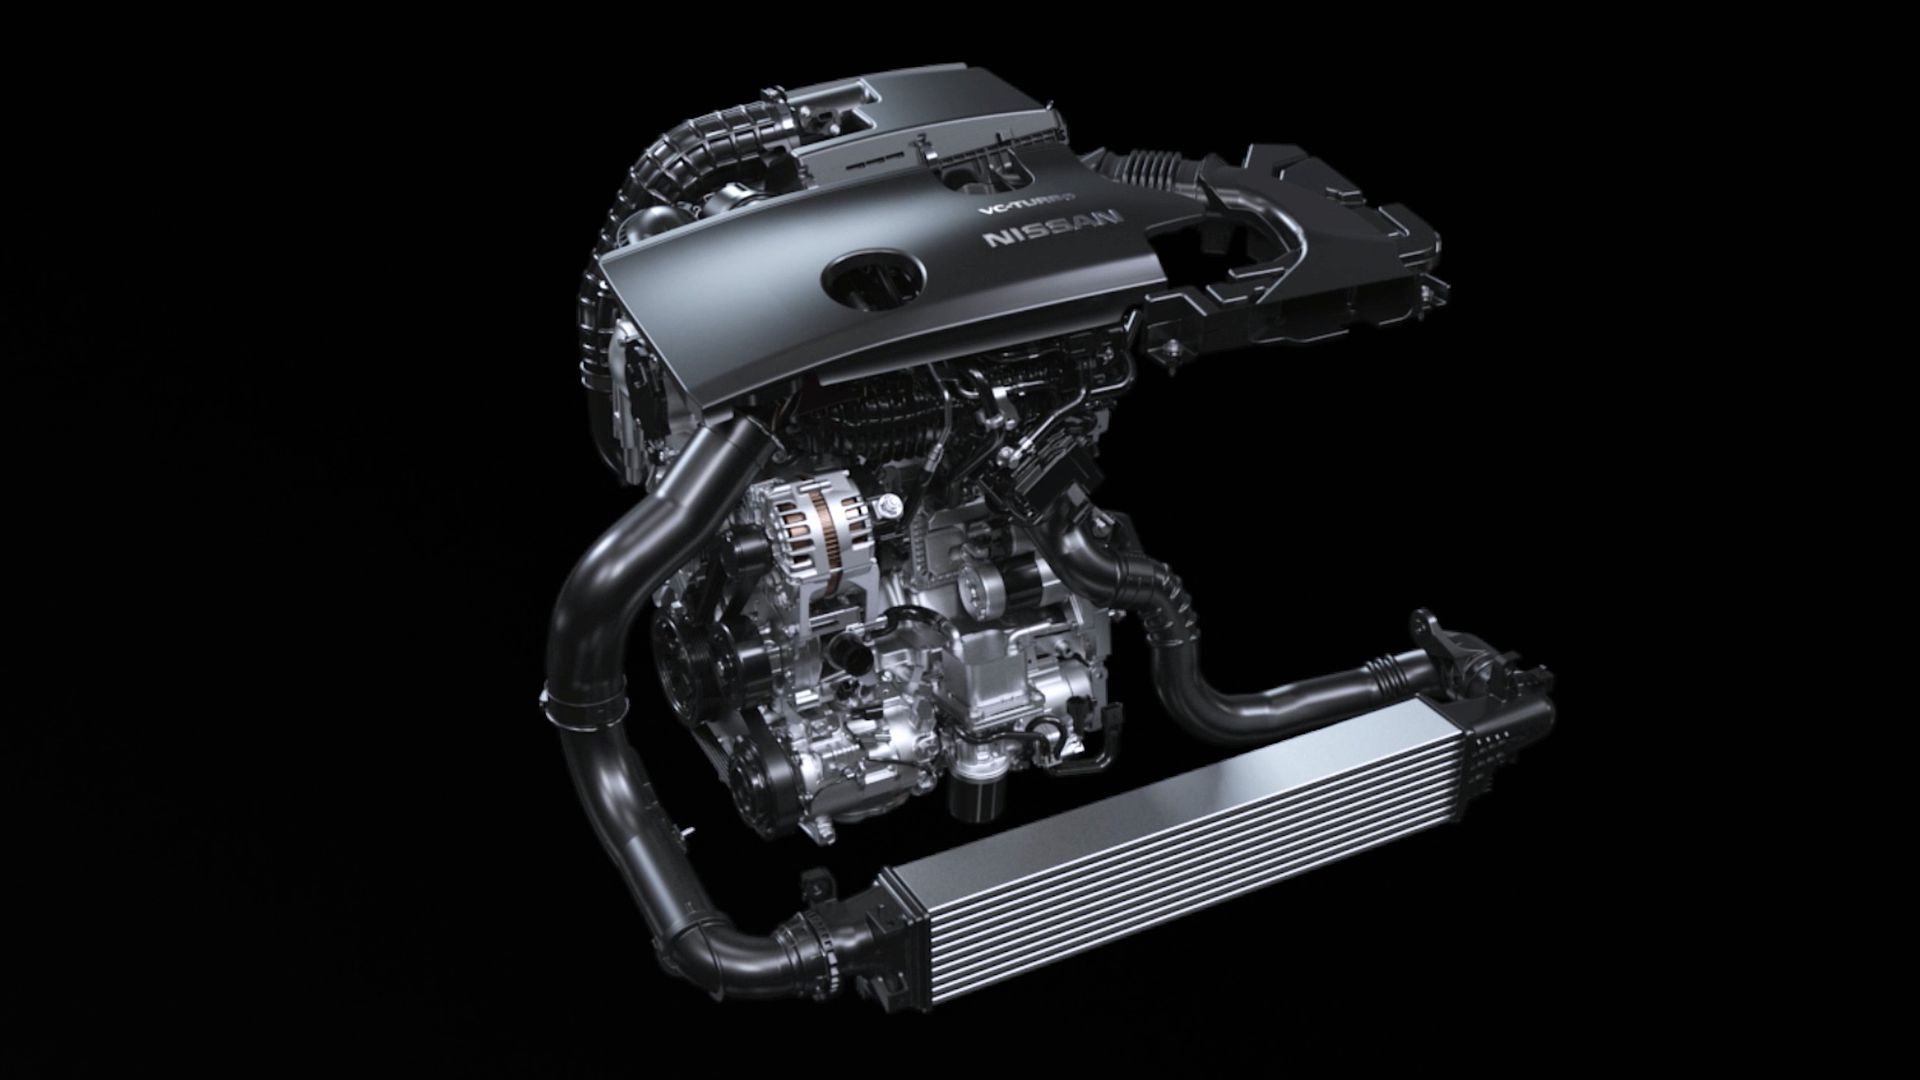 Photo of Nissan's VC-turbo engine, which is one of the most advanced internal combustion engines 